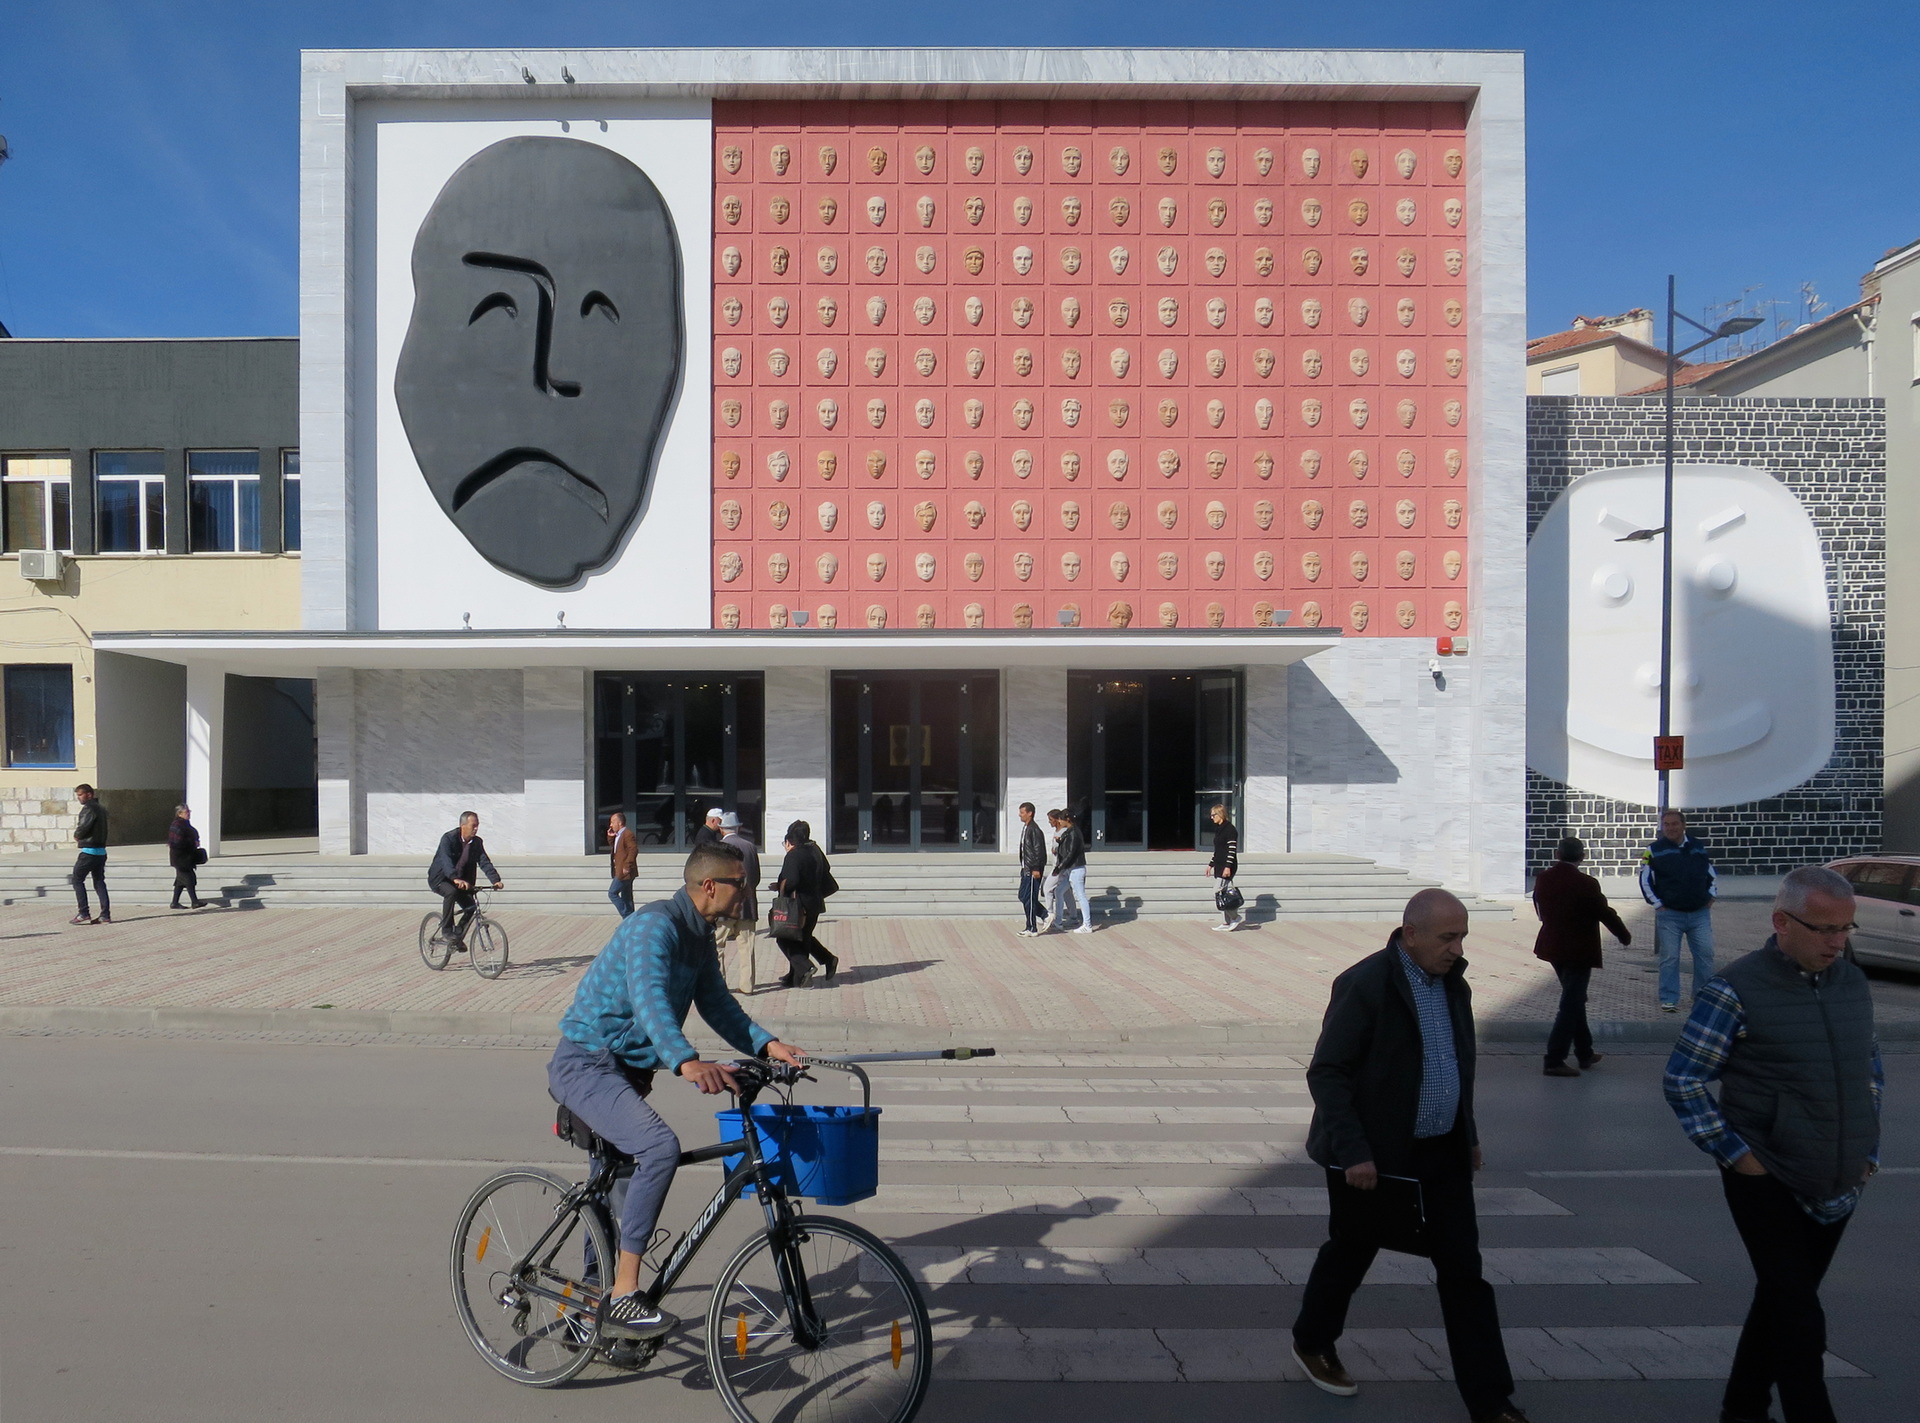 <p>Outside, the traditional theatrical masks of tragedy and comedy are enlarged to sculptural super-signs: tragedy (black, convex) on the main frontage, comedy (white, concave) on the new stair cube.</p>